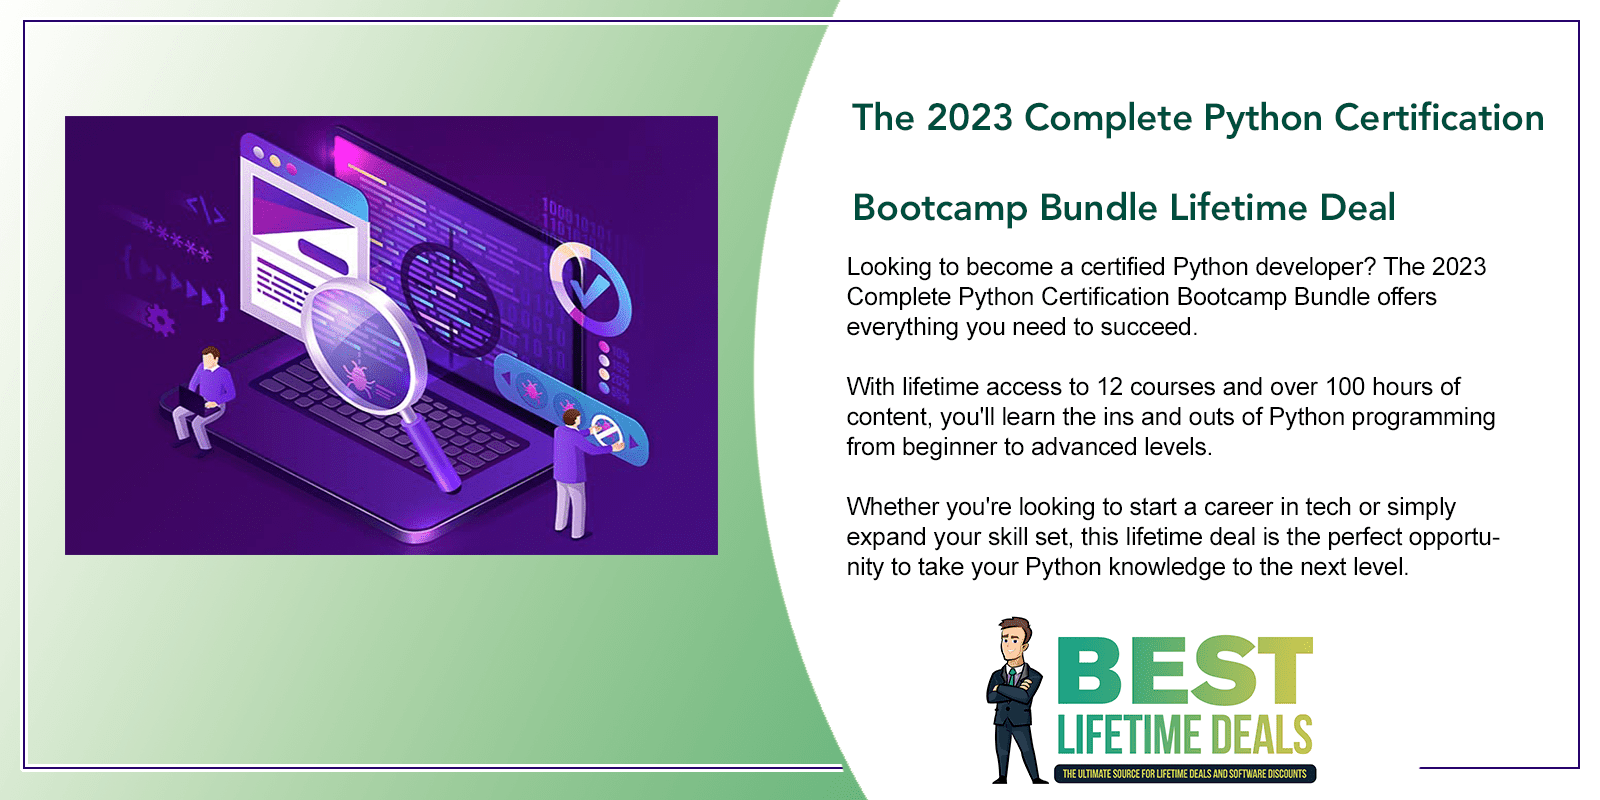 The 2023 Complete Python Certification Bootcamp Bundle Lifetime Deal Featured Image